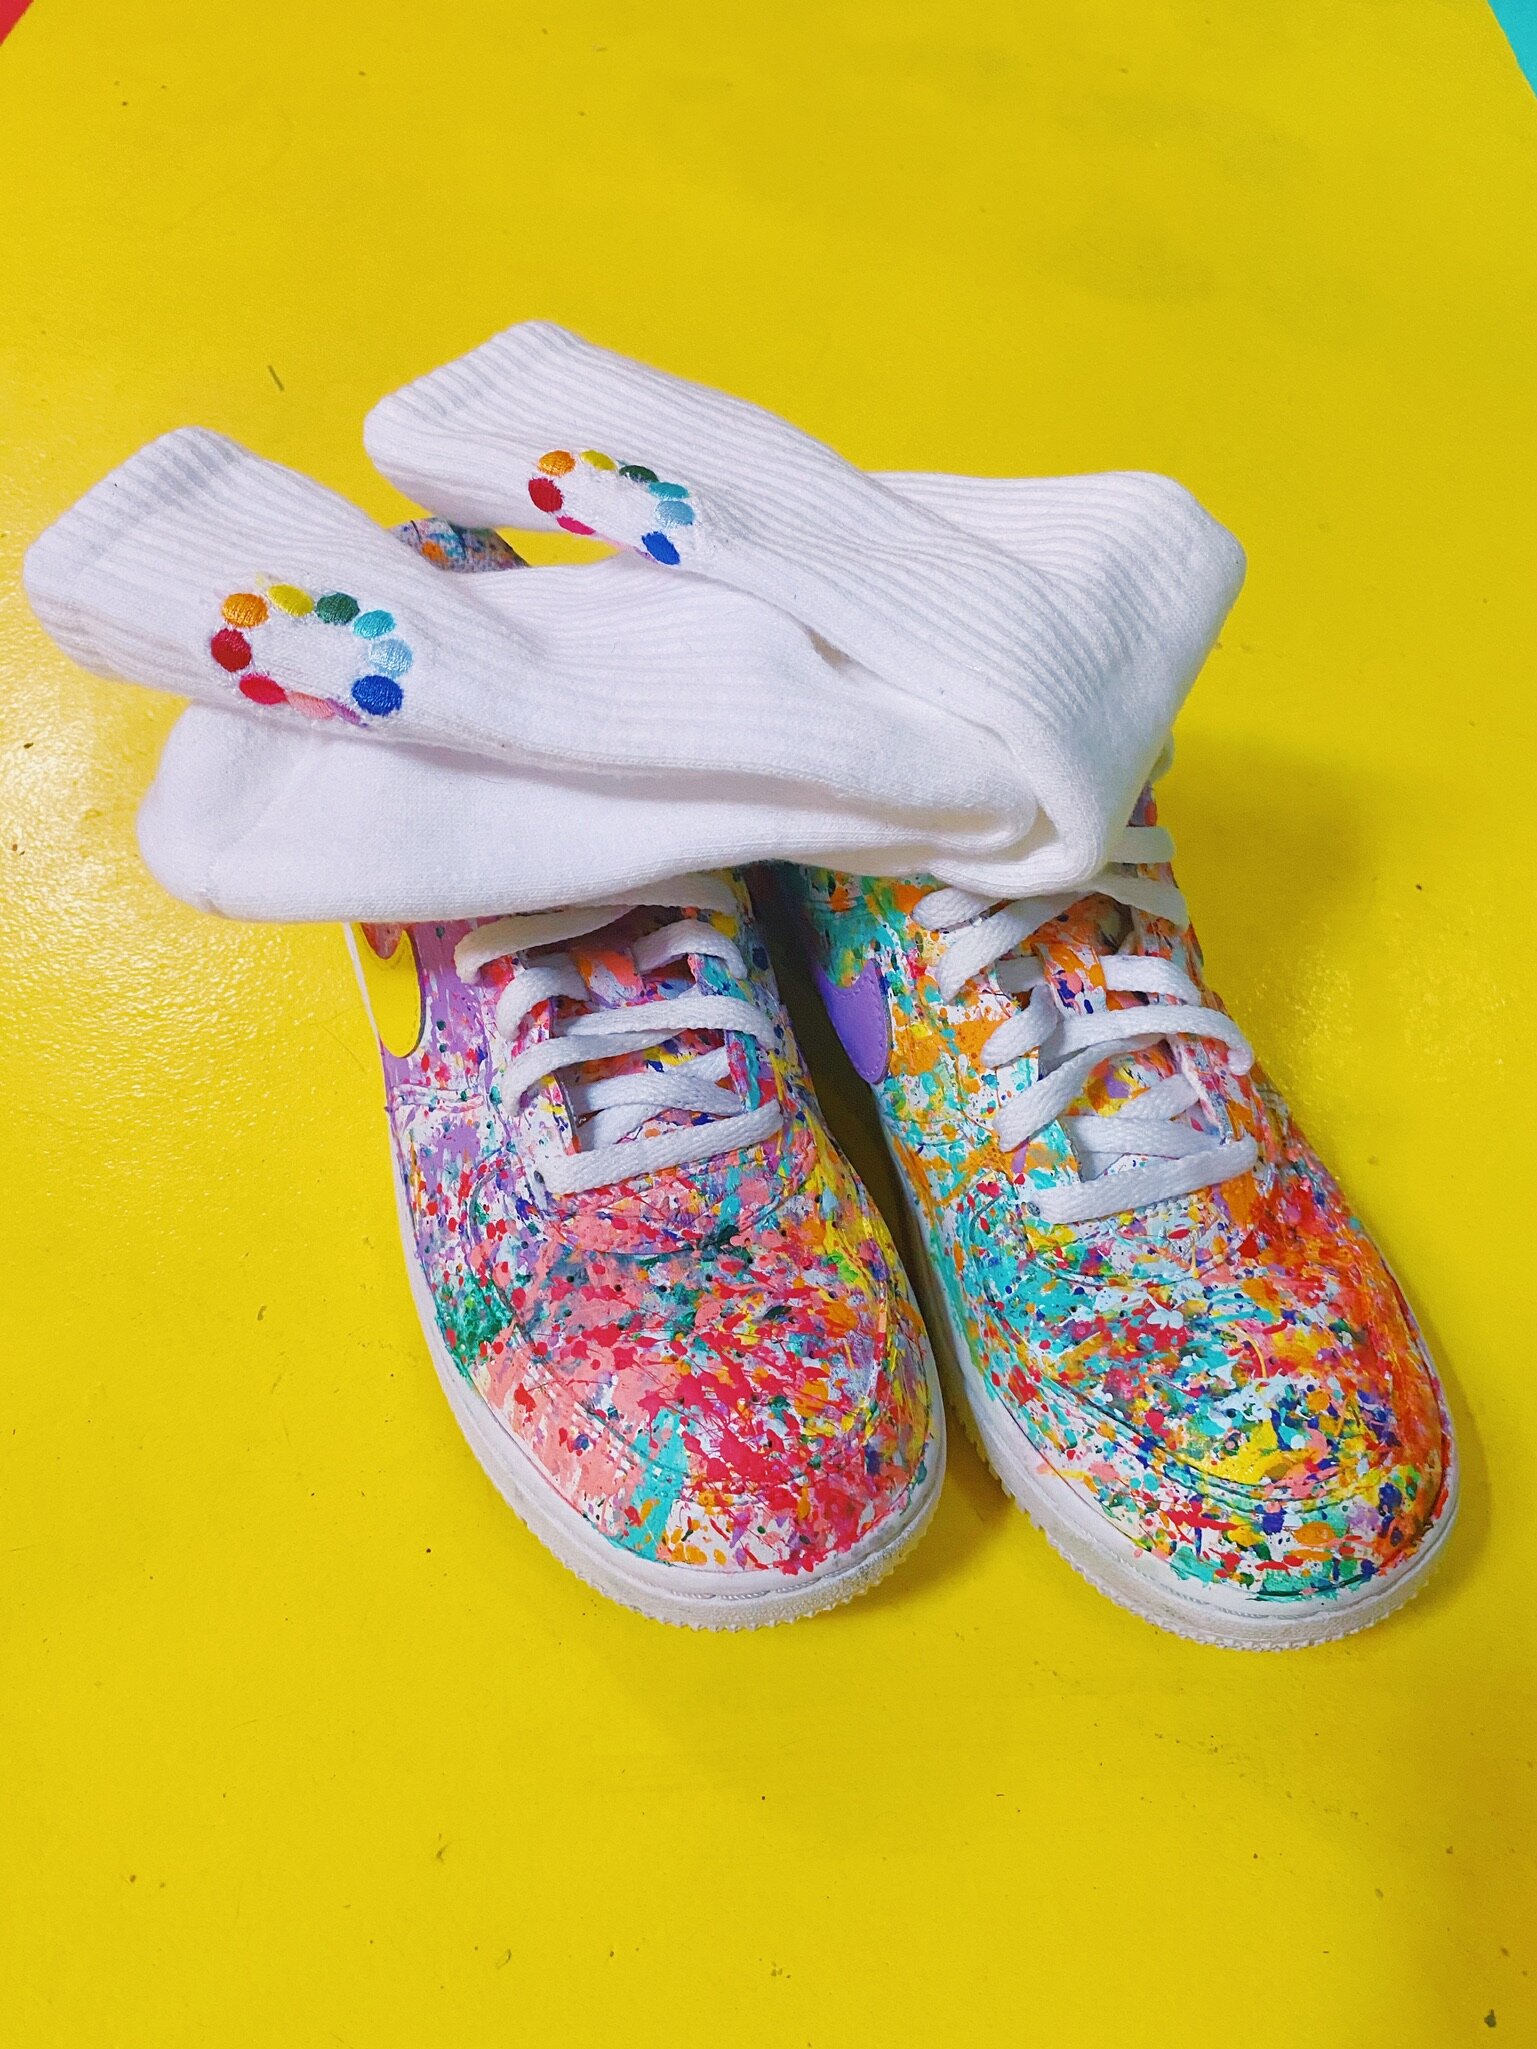 colorful-painted-shoes-with-superbloom-embroidered-white-socks.JPG